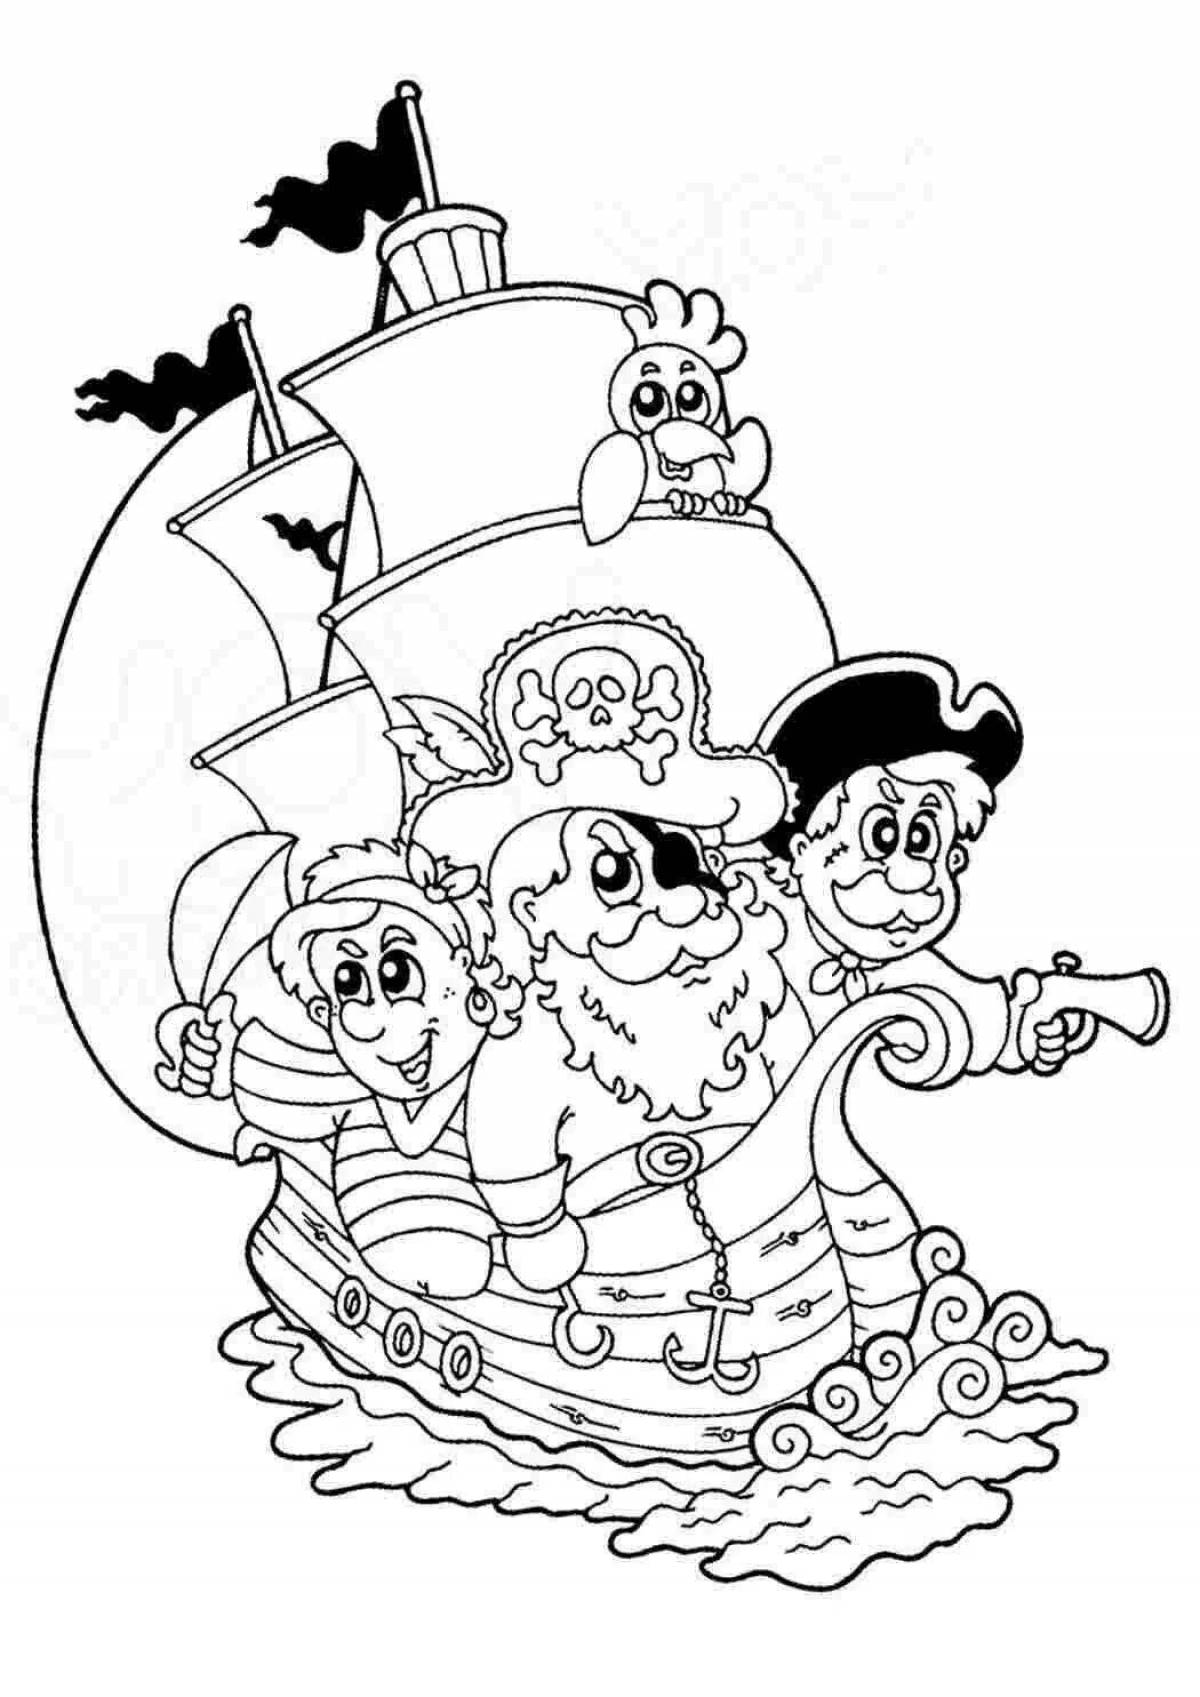 Amazing pirate ship coloring page for kids